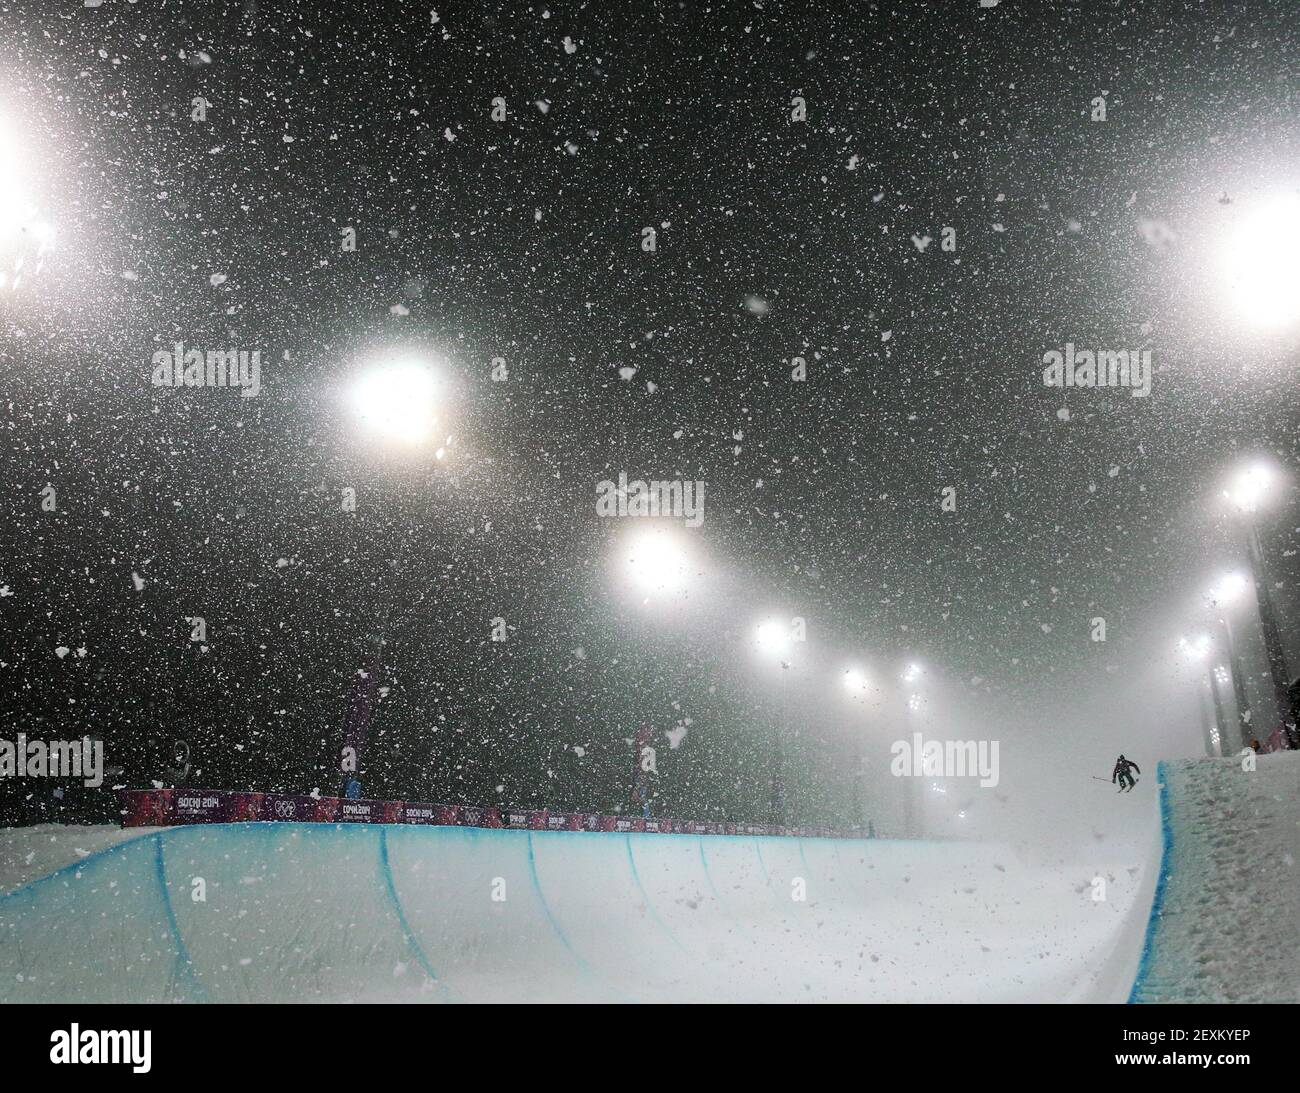 Competitors warm up in heavy snow for the finals of the men's ski halfpipe at Rosa Khutor Extreme Park during the Winter Olympics in Sochi, Russia, Tuesday, Feb. 18, 2014. (Photo by Brian Cassella/Chicago Tribune/MCT/Sipa USA) Stock Photo